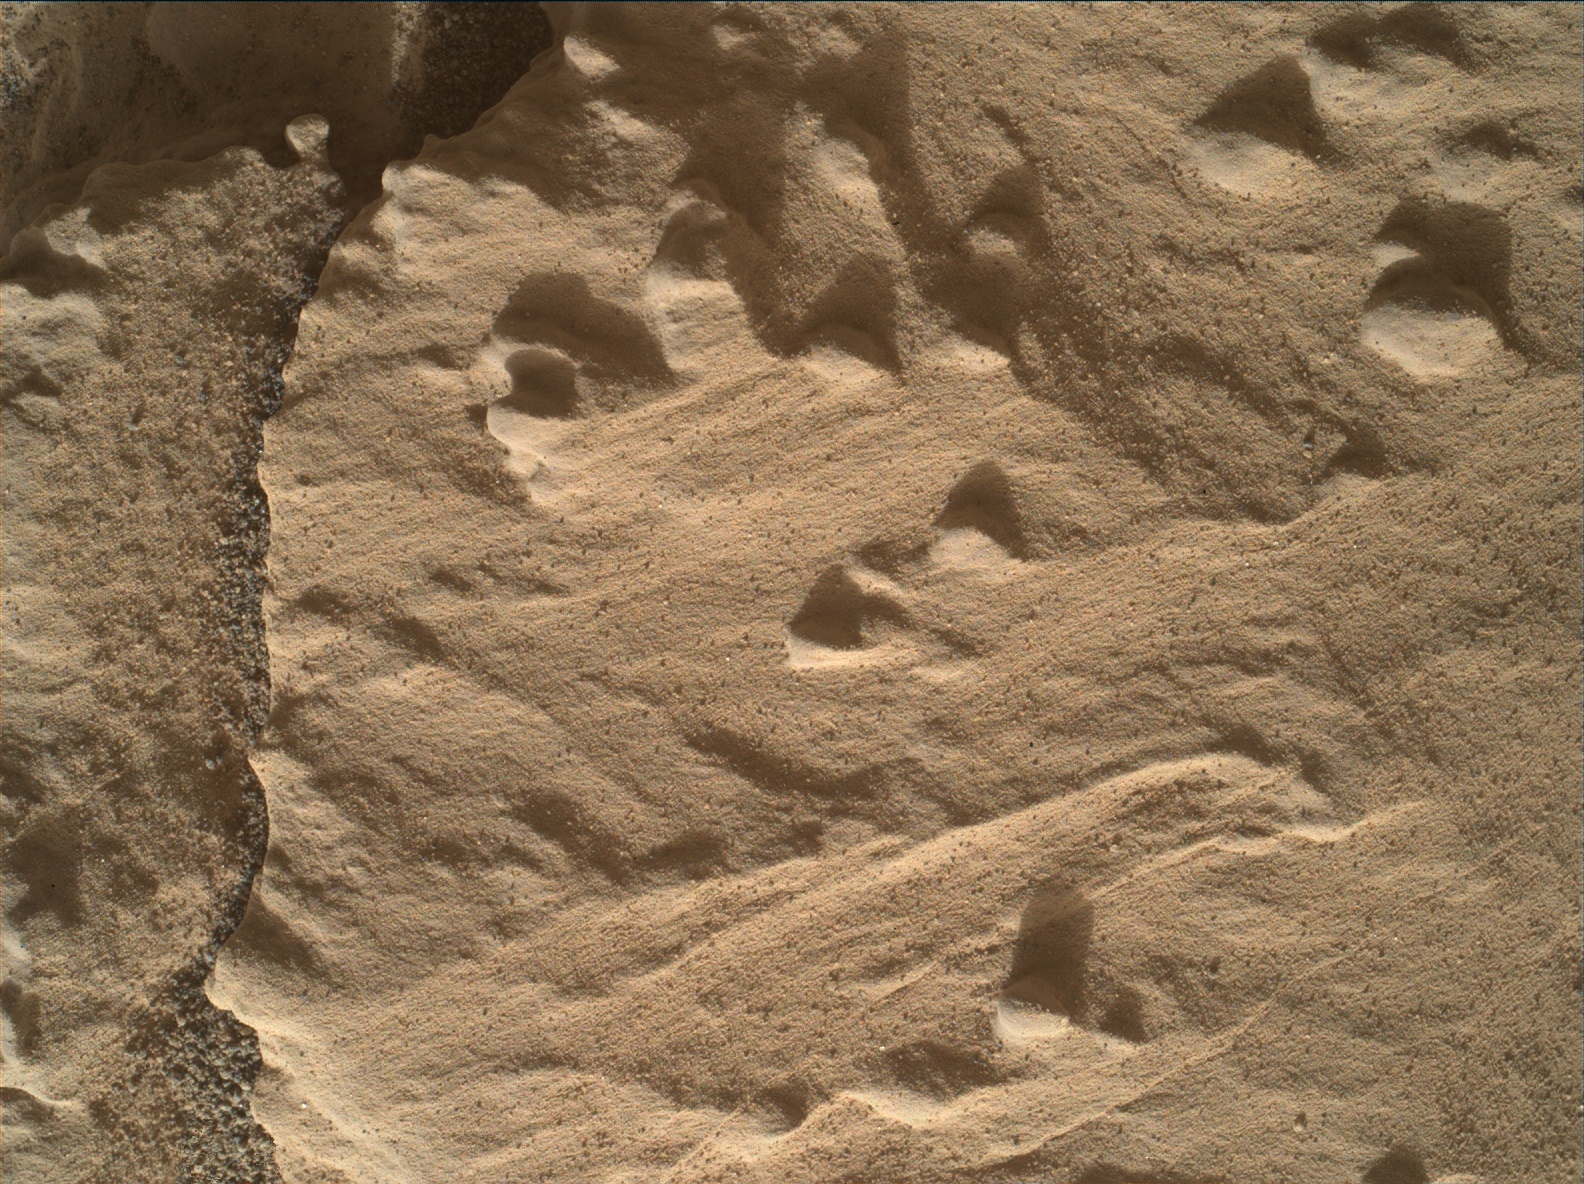 Nasa's Mars rover Curiosity acquired this image using its Mars Hand Lens Imager (MAHLI) on Sol 1826